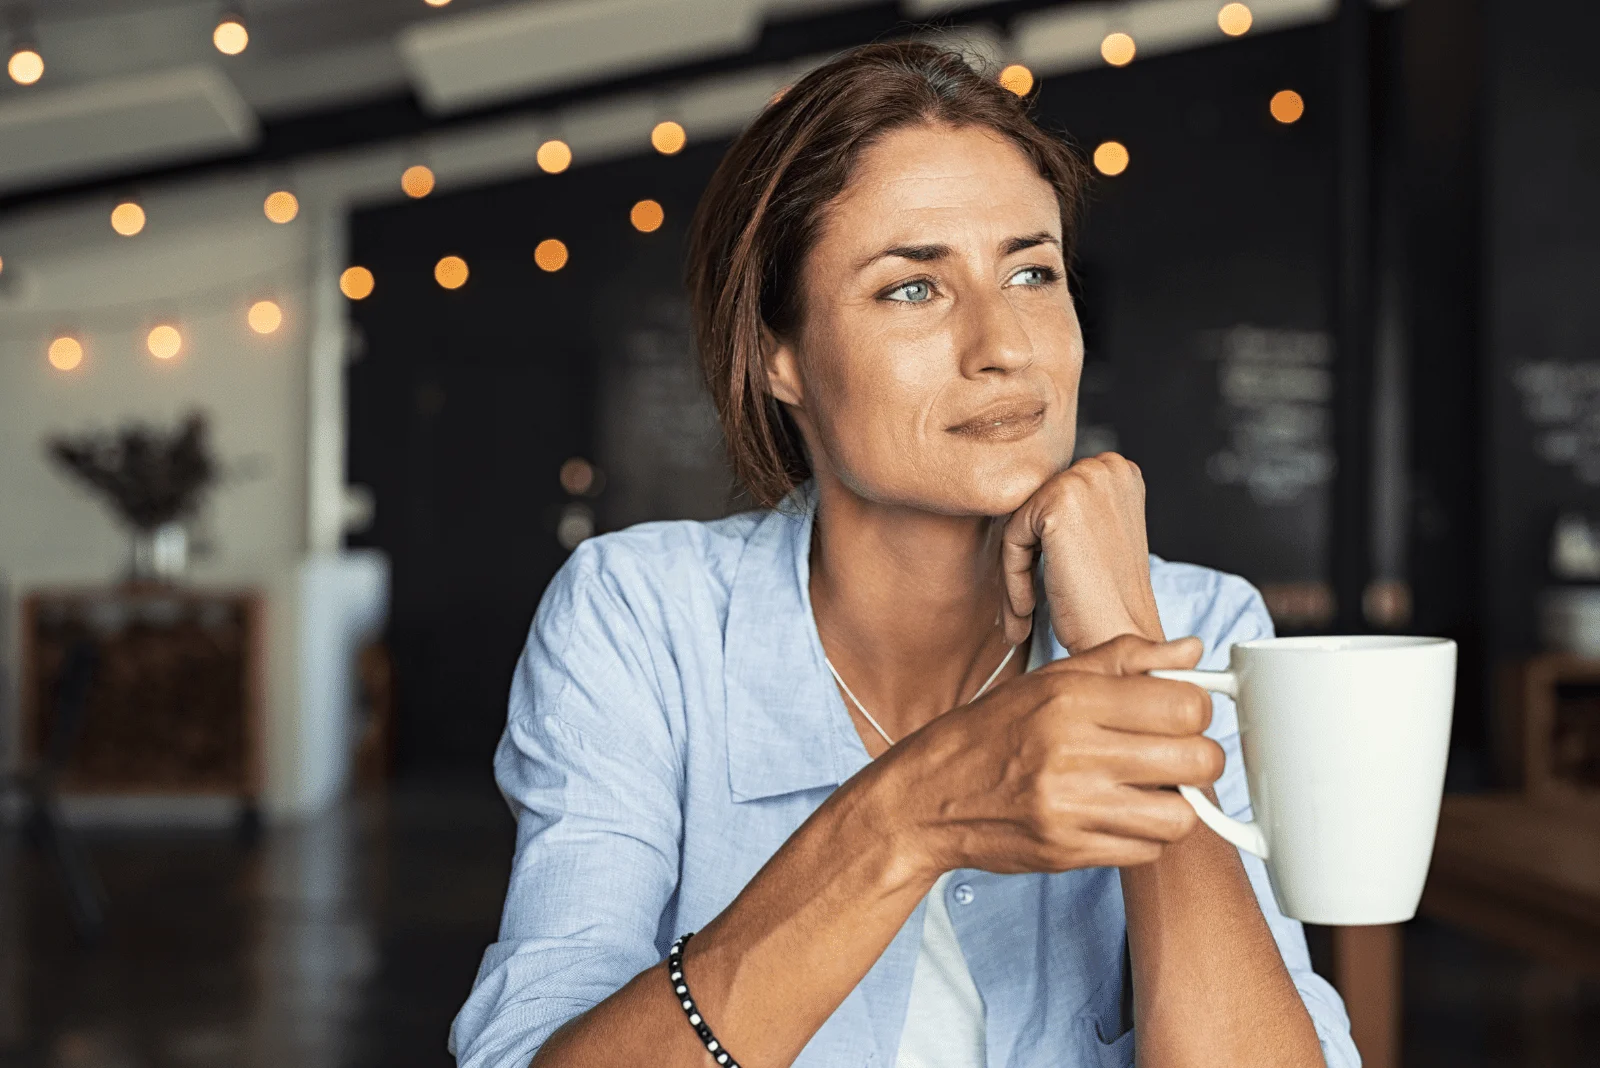 pensive woman sits with a cup in her hand